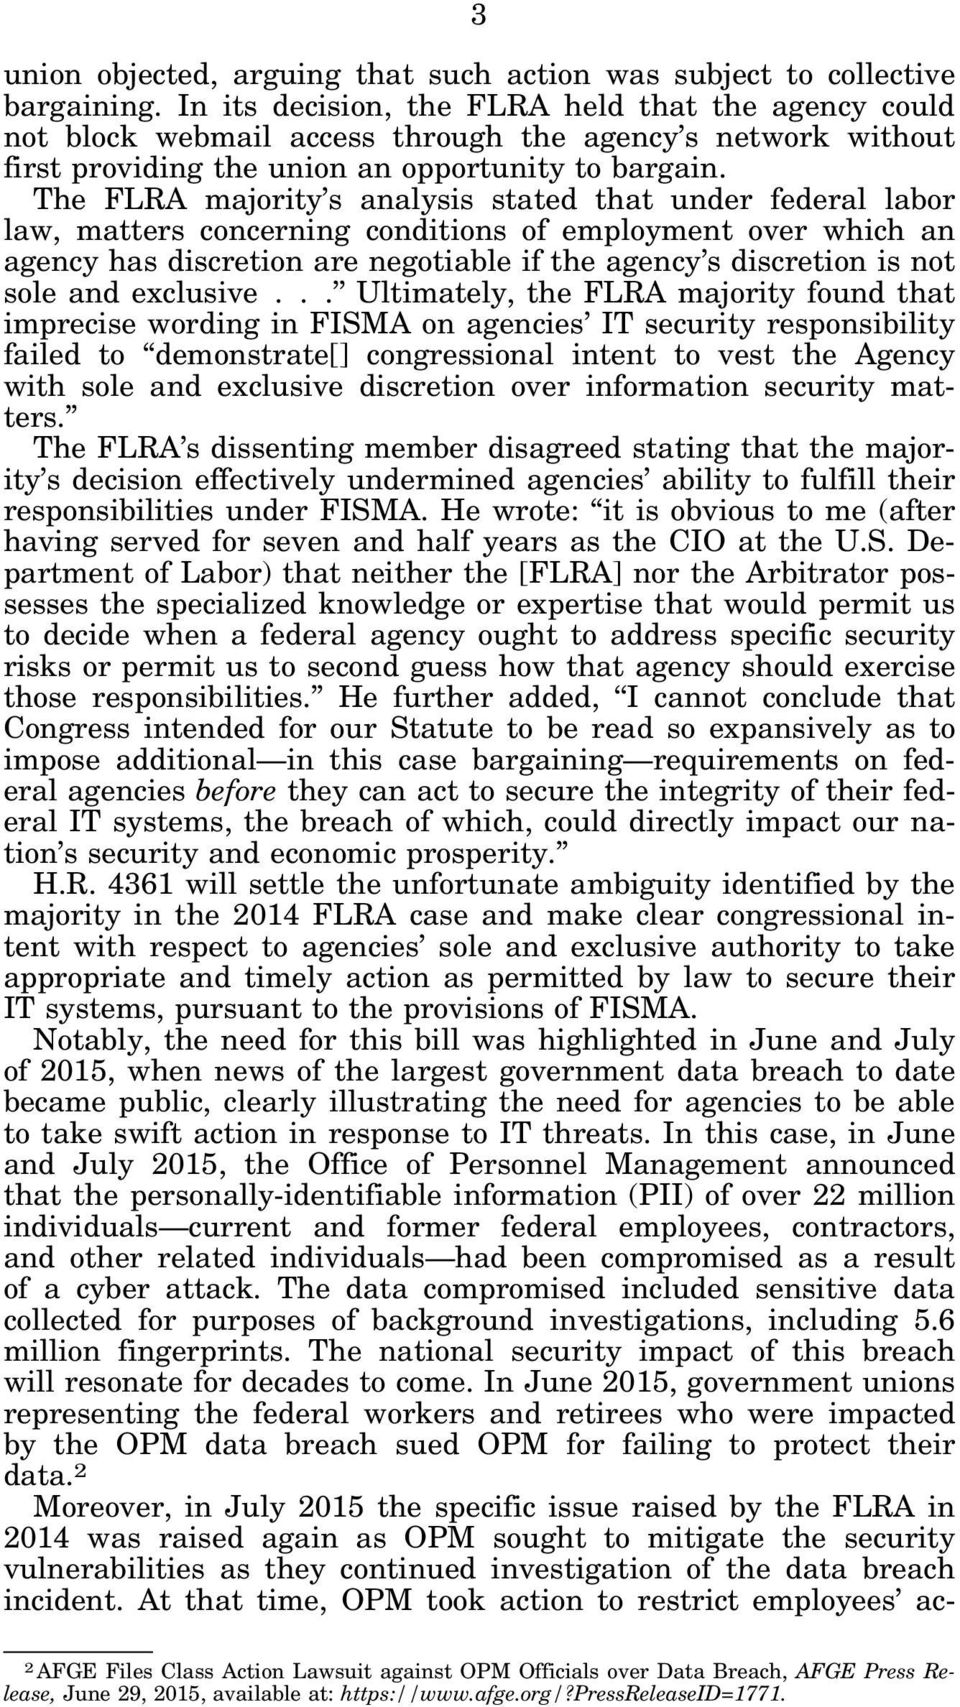 The FLRA majority s analysis stated that under federal labor law, matters concerning conditions of employment over which an agency has discretion are negotiable if the agency s discretion is not sole